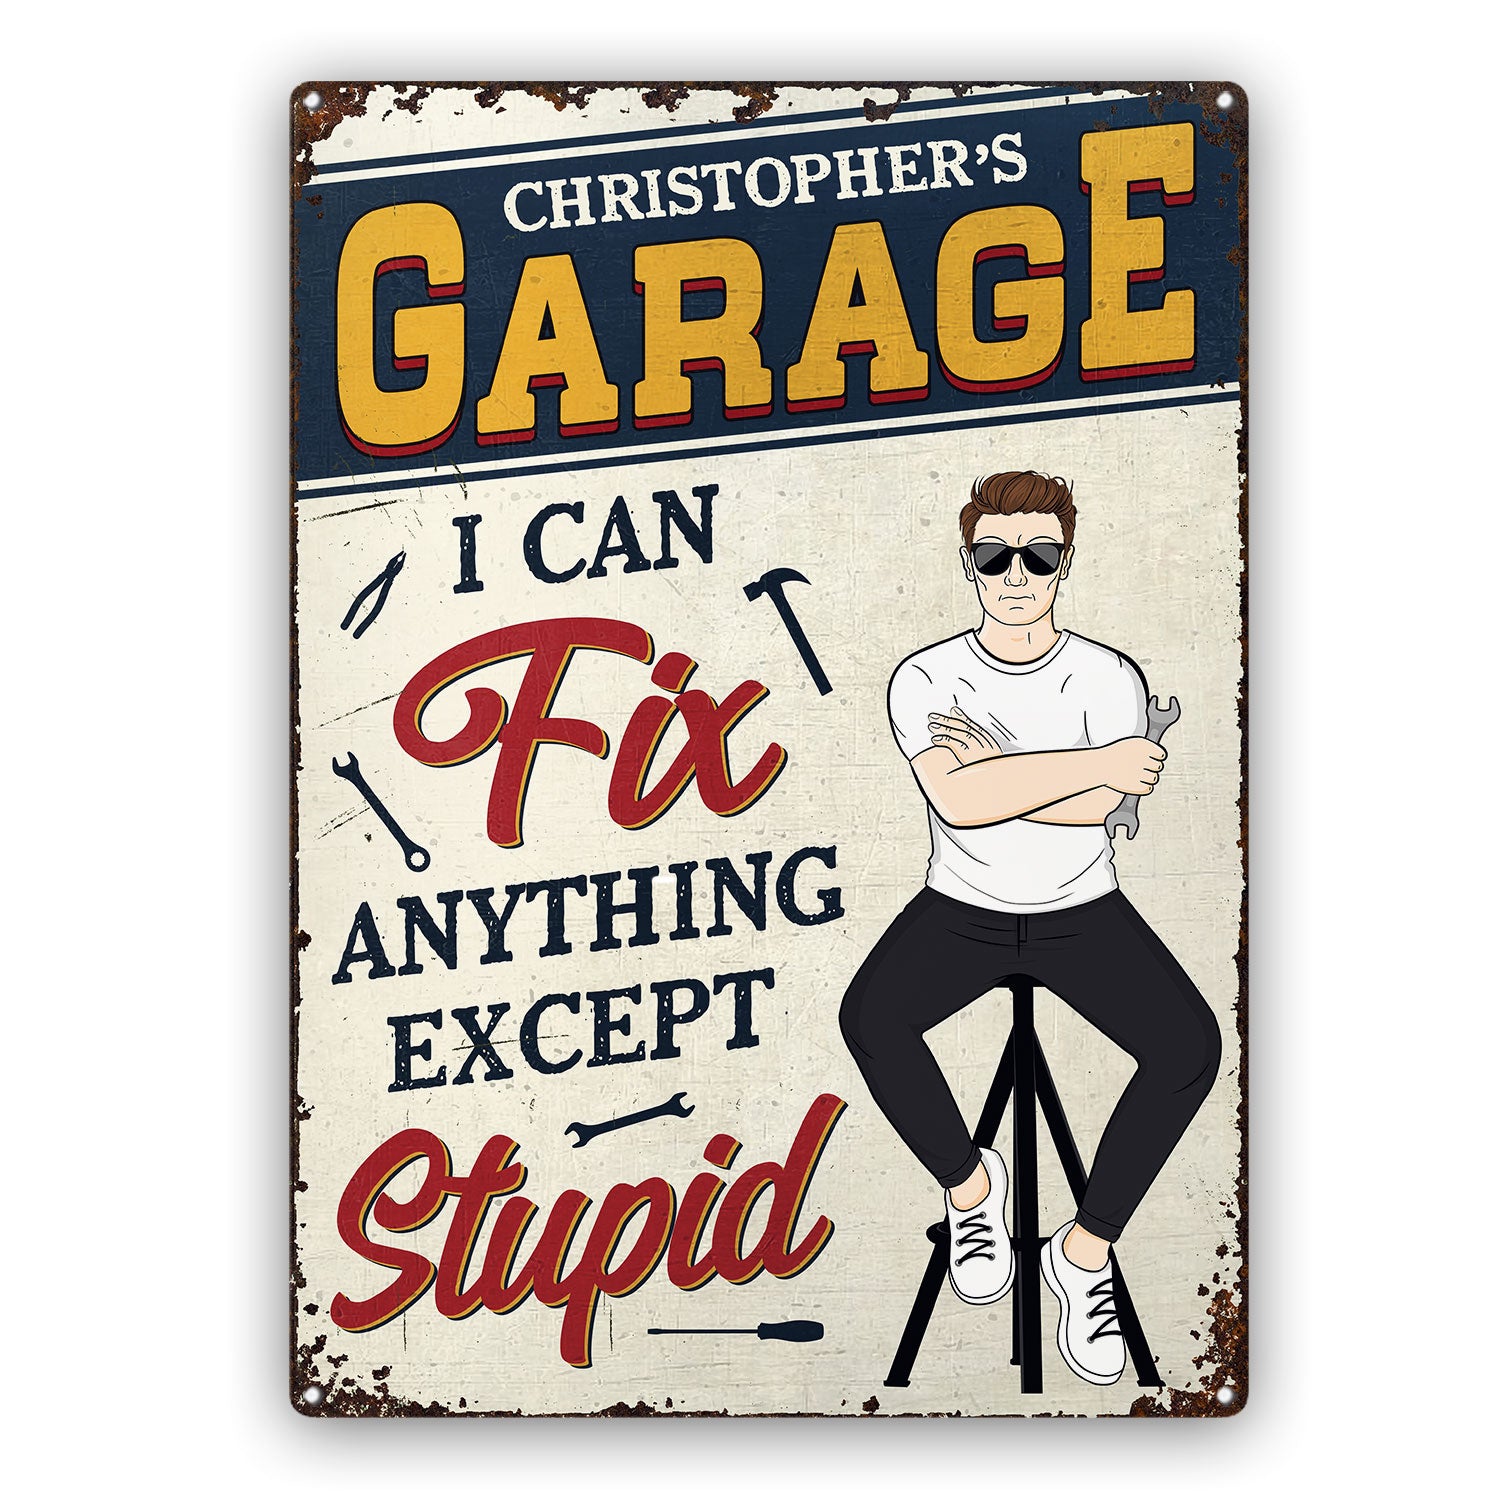 Retro Garage Fix Anything Except Stupid - Garage Home Decor - Personalized Custom Classic Metal Signs